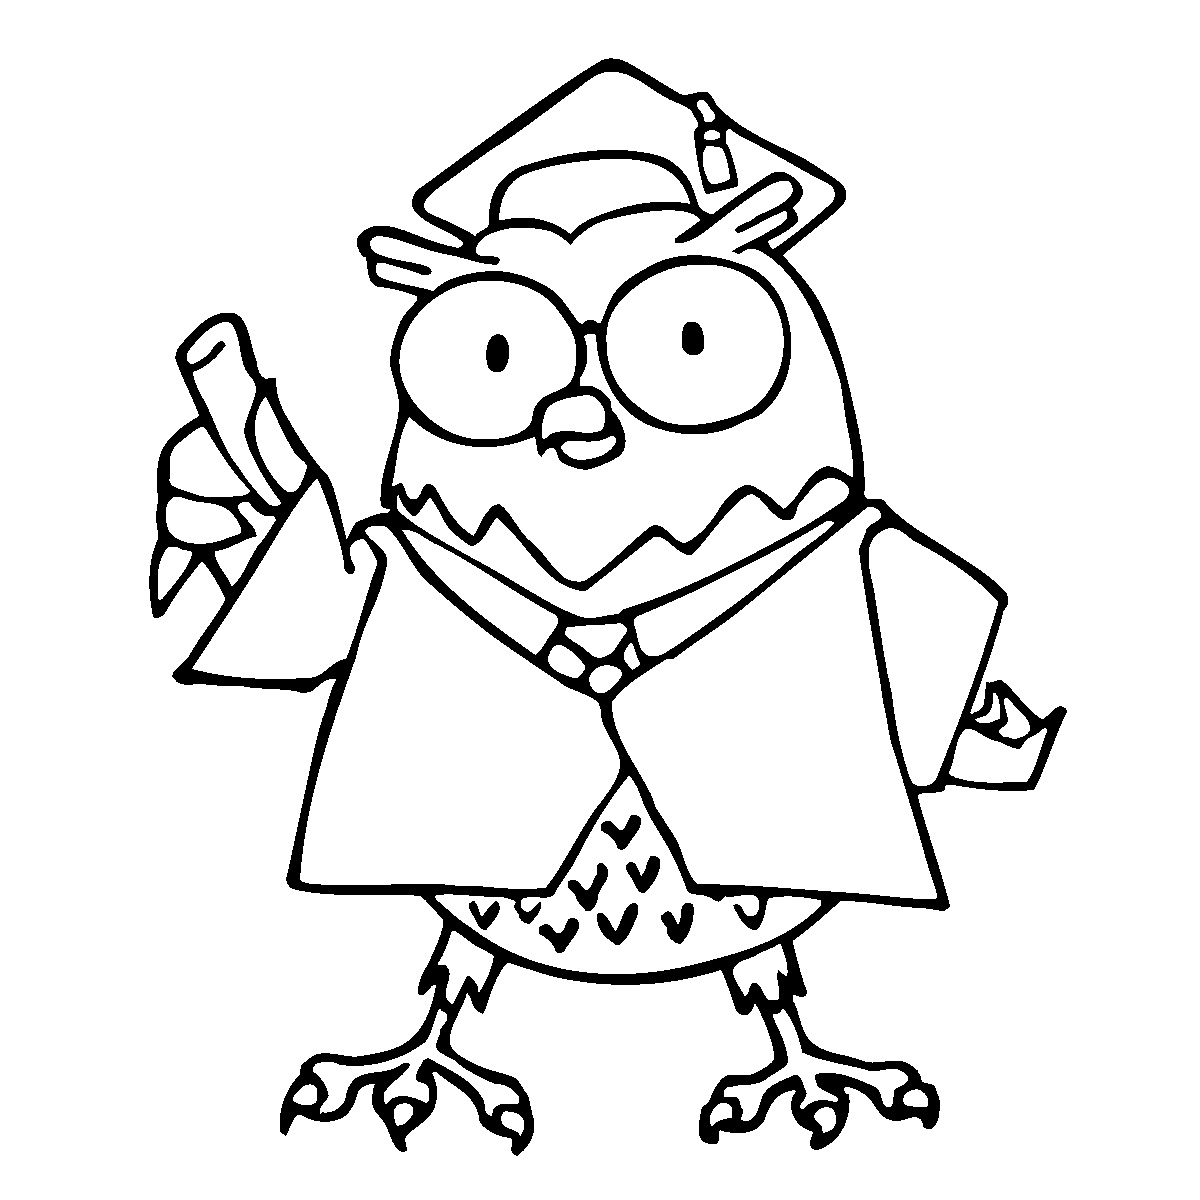 Owl Coloring Page Clipart